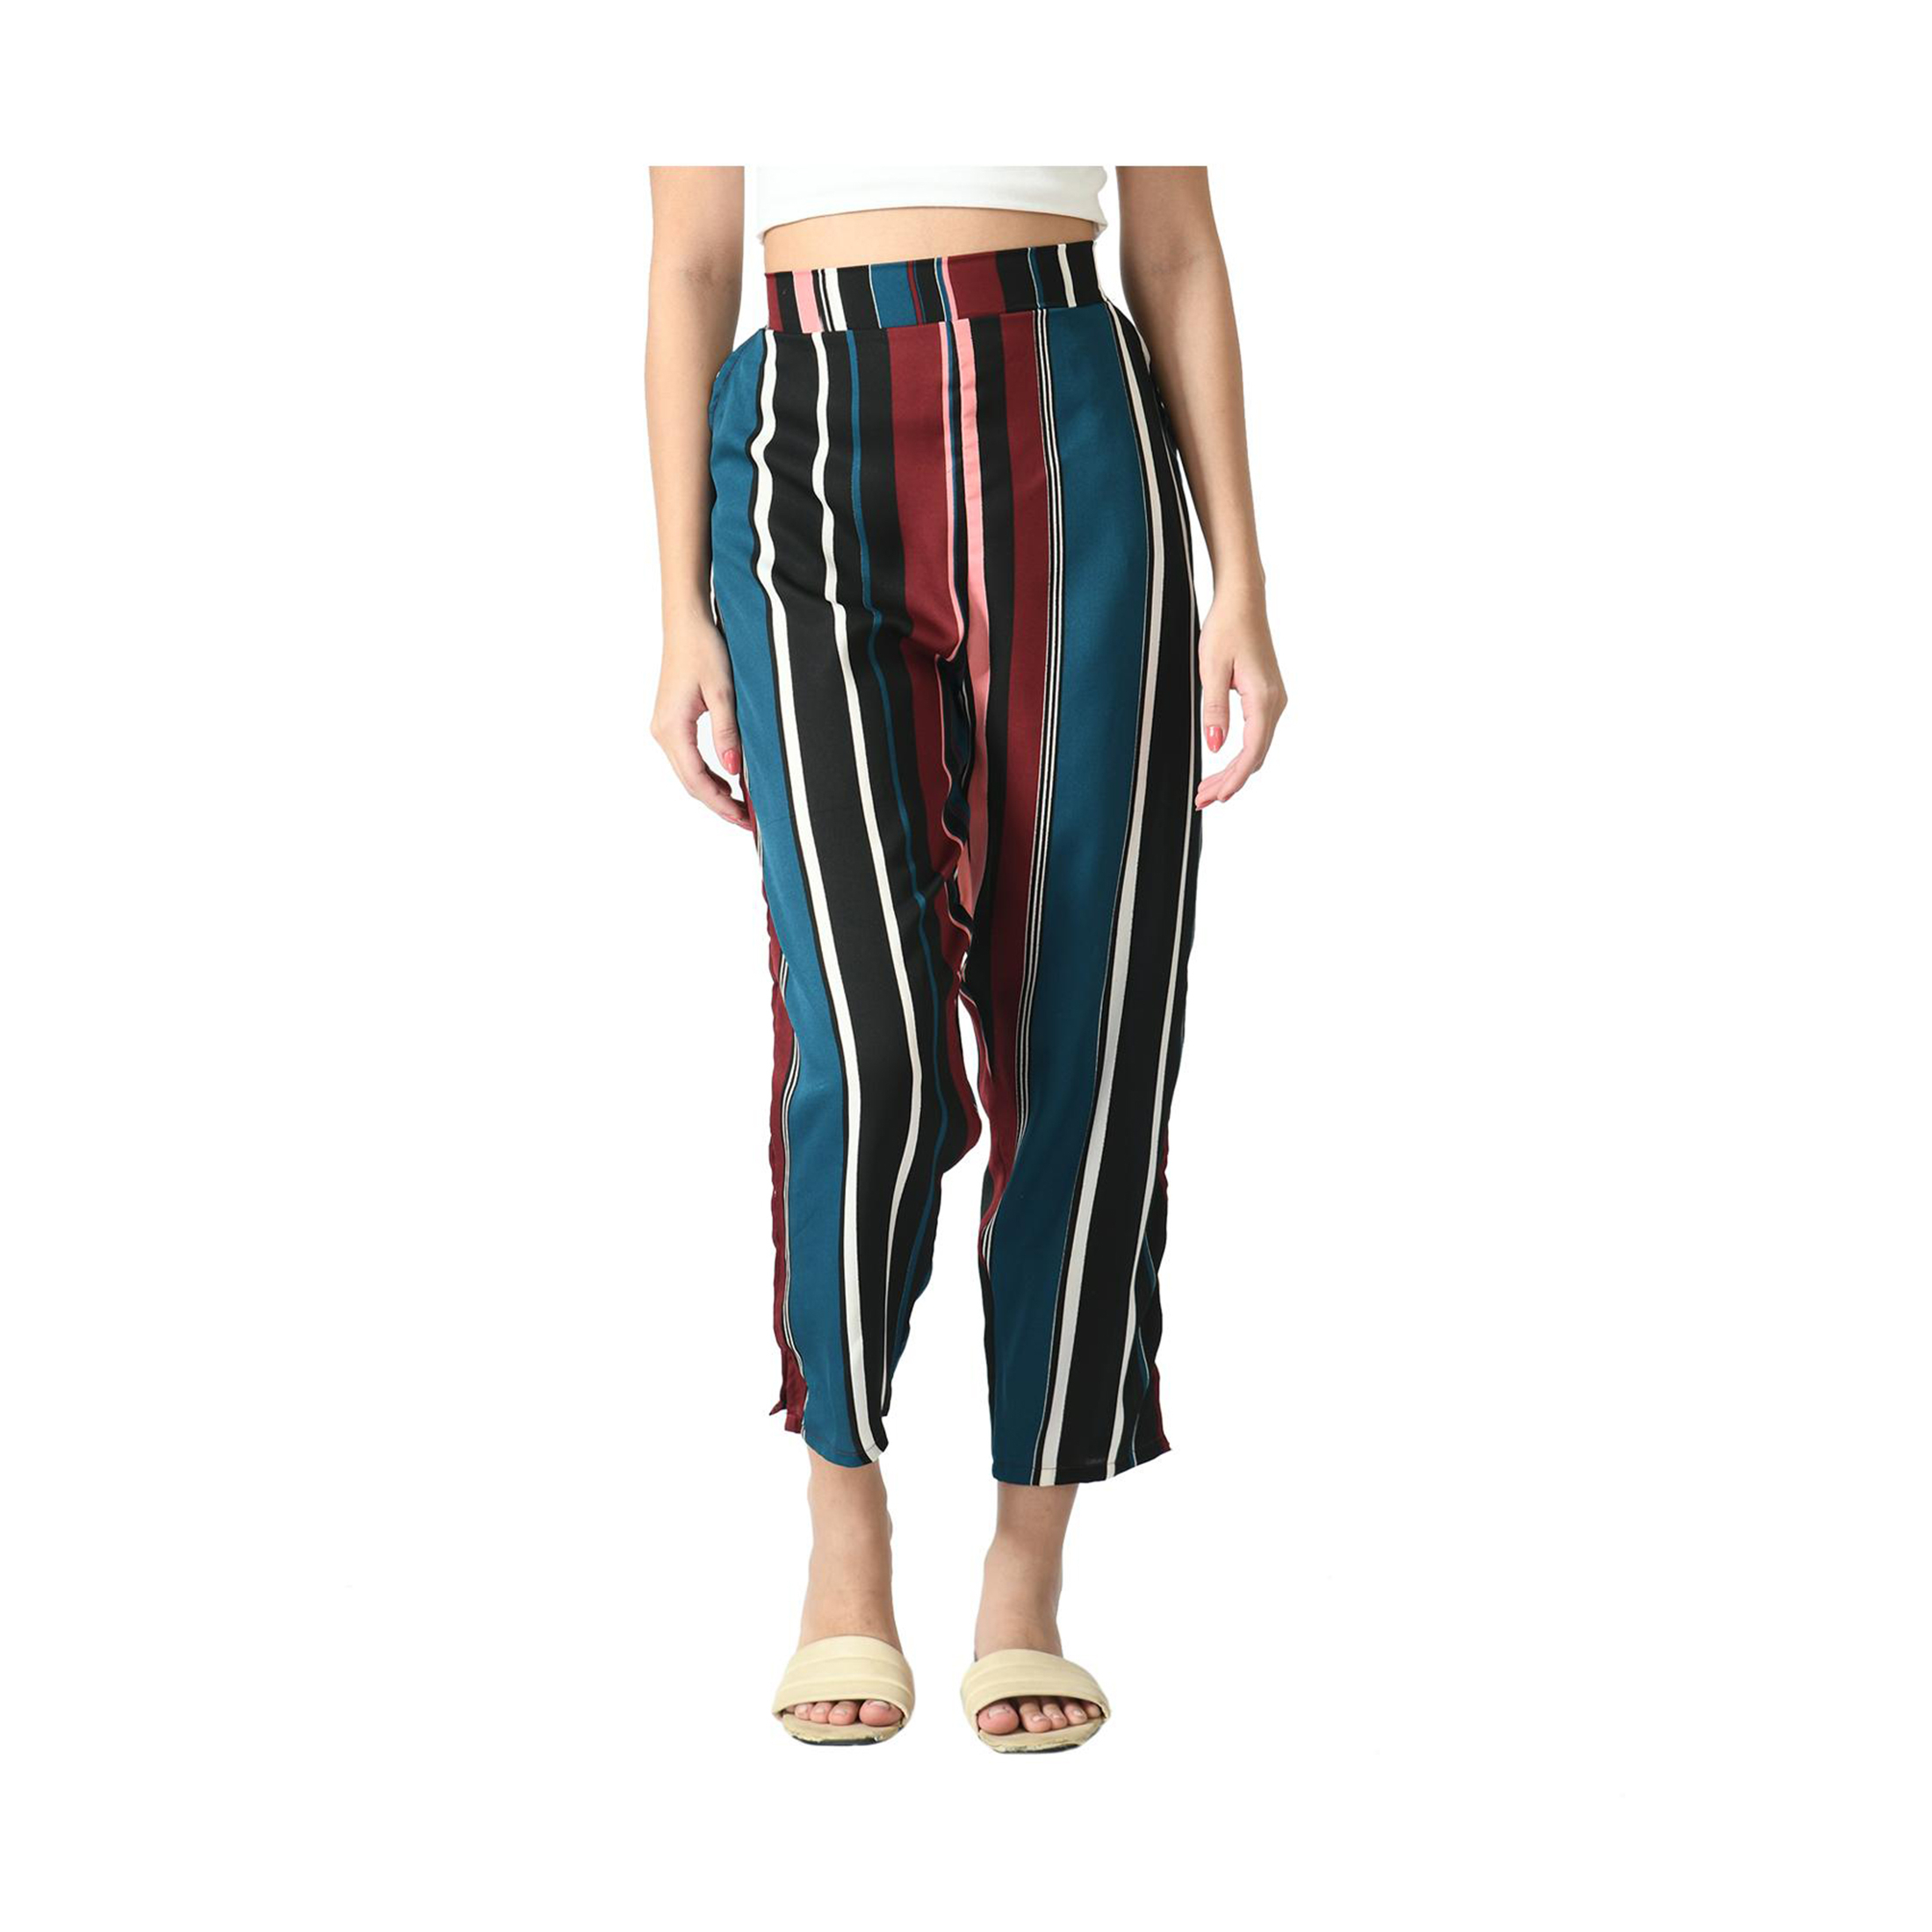 3-Pack: Ladies Striped High Waisted Summer Soft Wide Open Boho Leg Palazzo Pants - Small